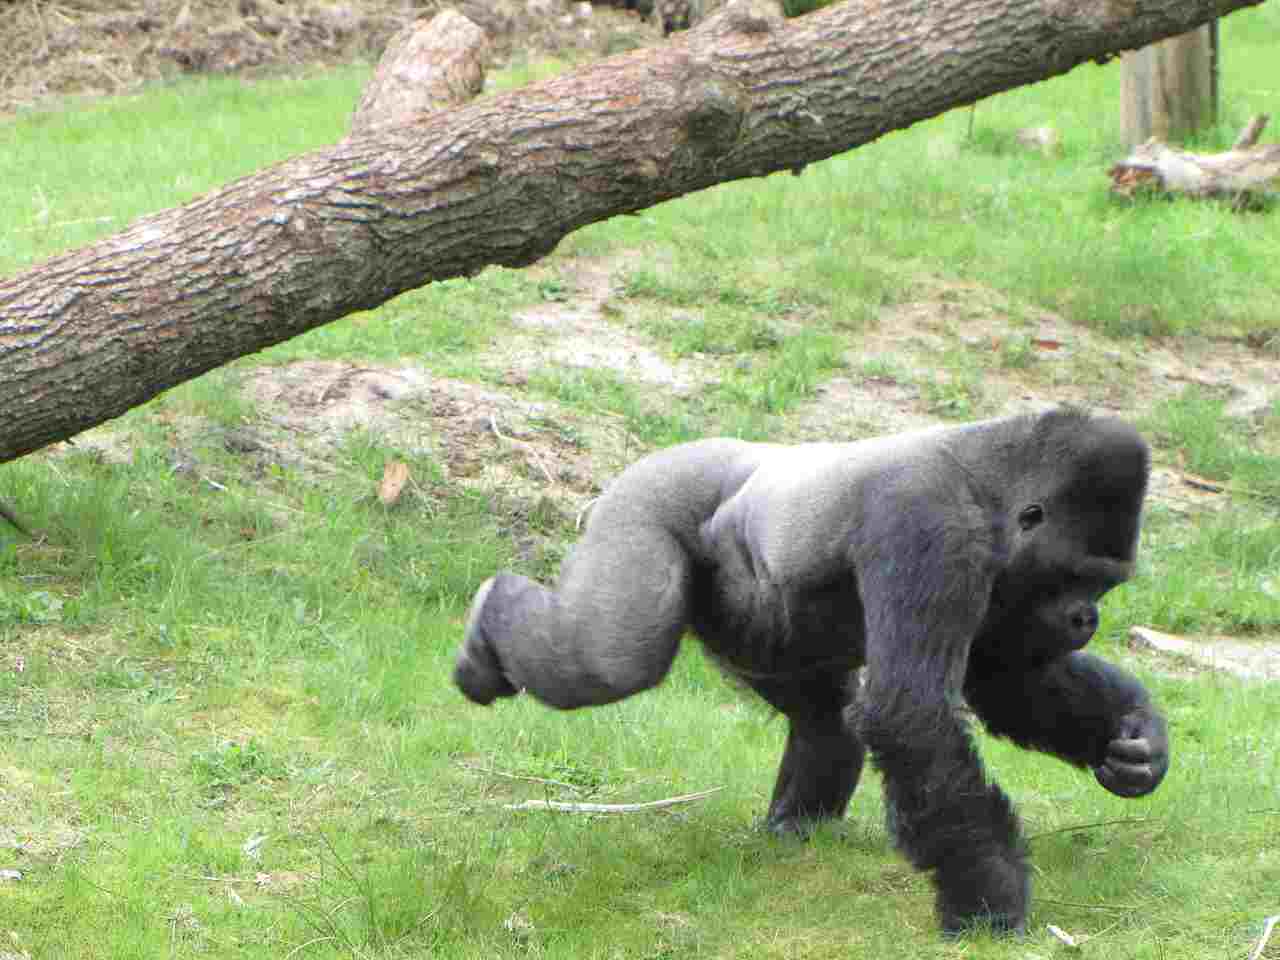 Silverback Gorilla Vs Grizzly Bear: The Environment and Lifestyle of Silverback Gorillas Influence Their Agility and Behavior (Credit: Isaladag 2010 .CC BY-SA 3.0.)